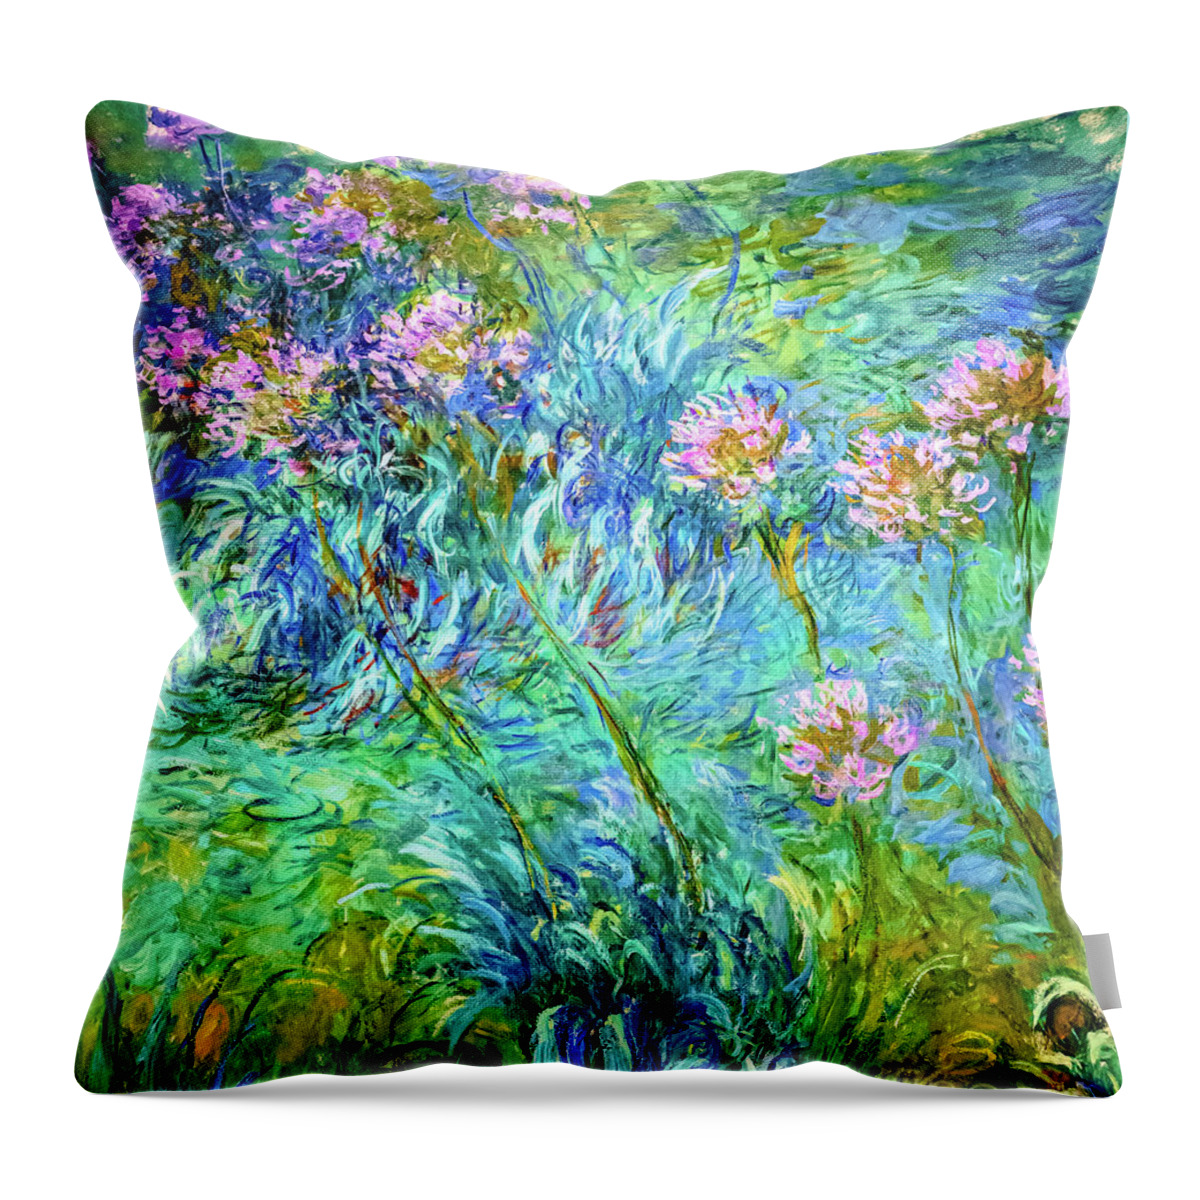 Agapanthus Throw Pillow featuring the painting Agapanthus by Monet by Claude Monet